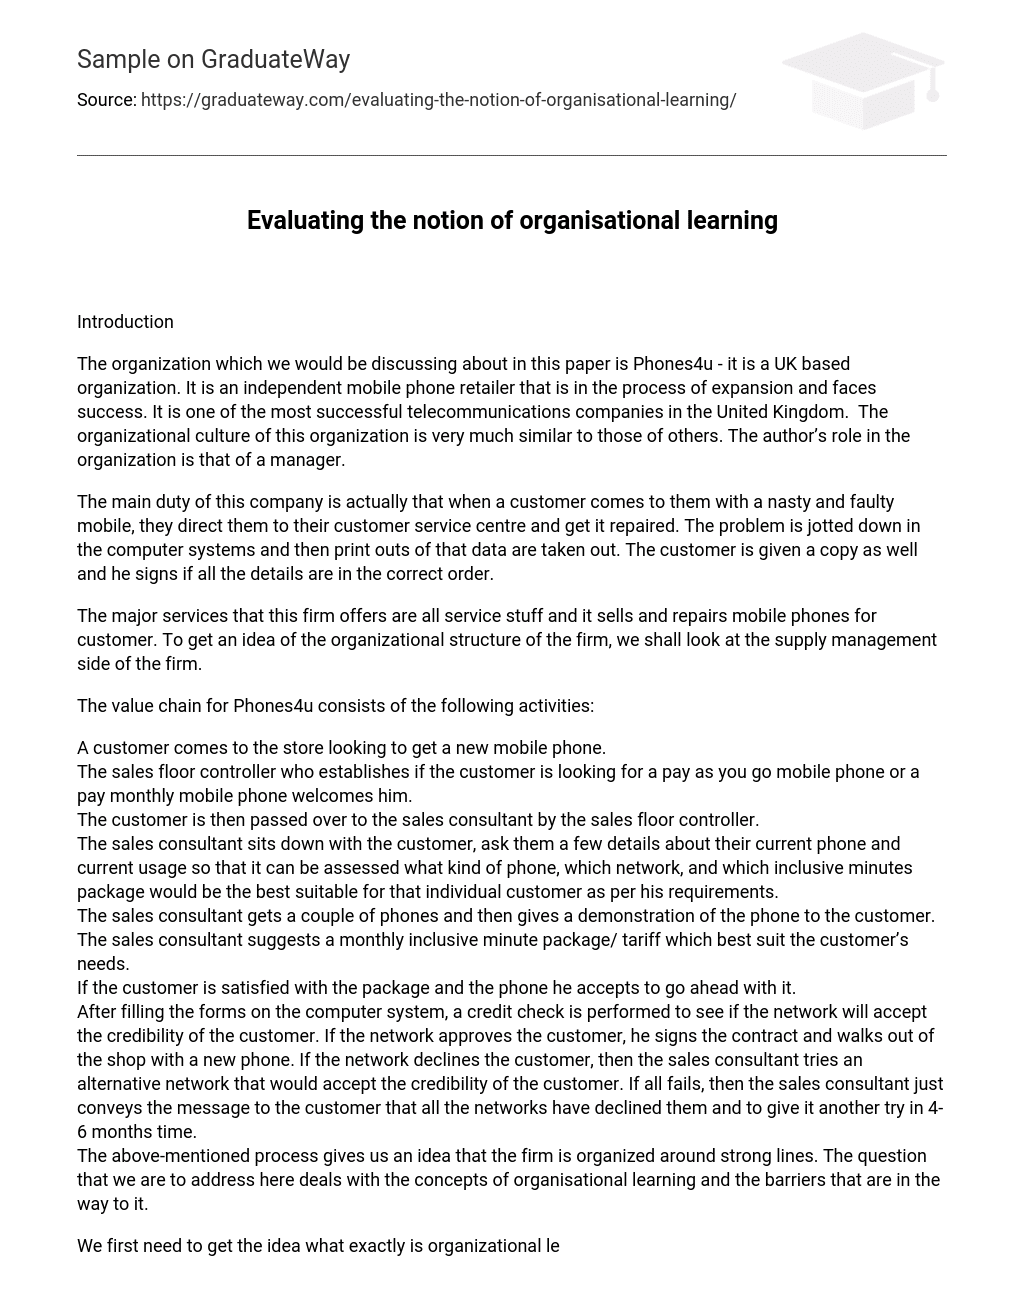 Evaluating the notion of organisational learning